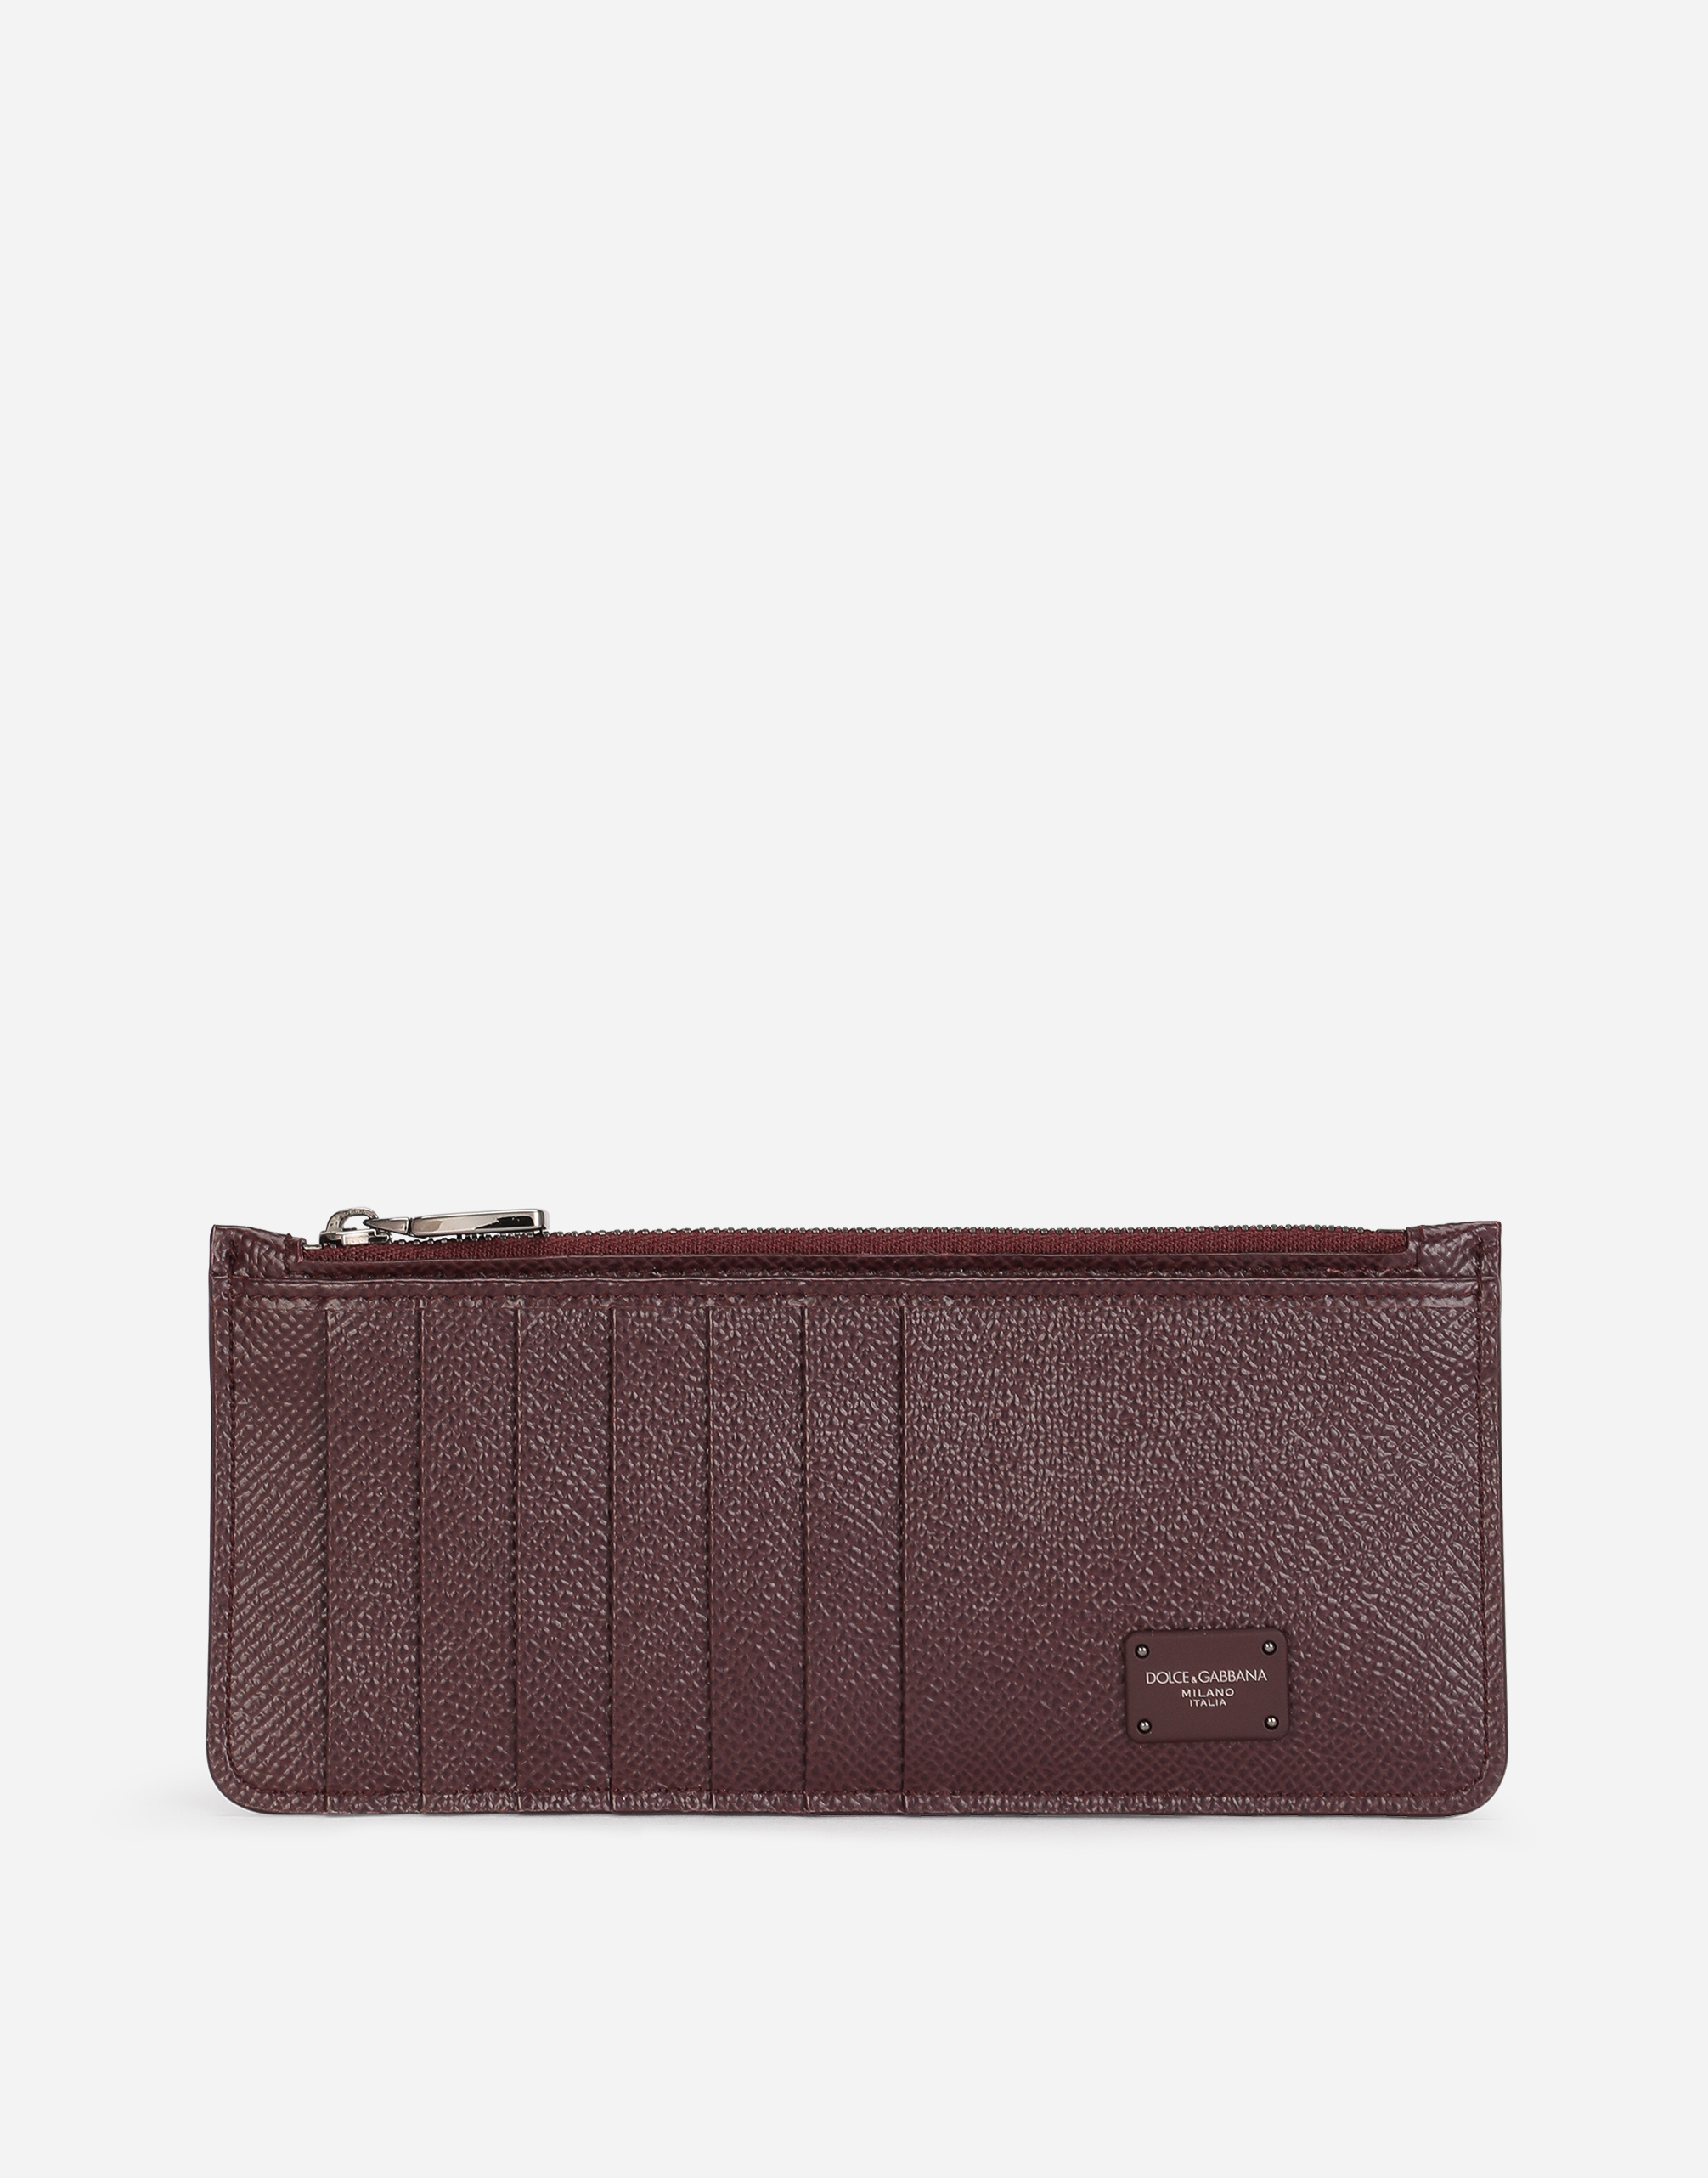 Dolce & Gabbana Dauphine Calfskin Vertical Card Holder With Branded Tag In Bordeaux